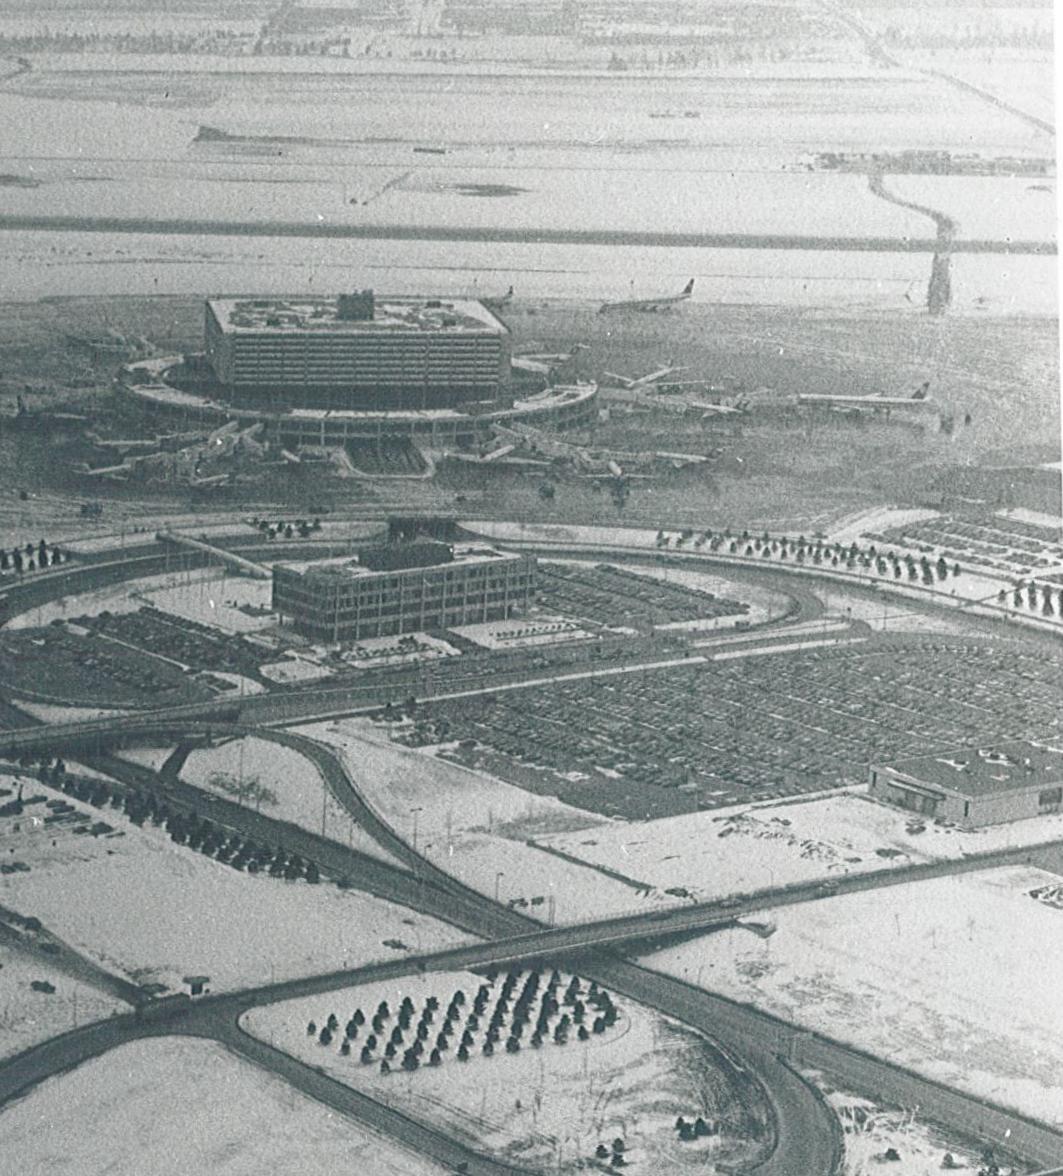 Terminal 1 at YYZ on a snowy day in the early 1970s